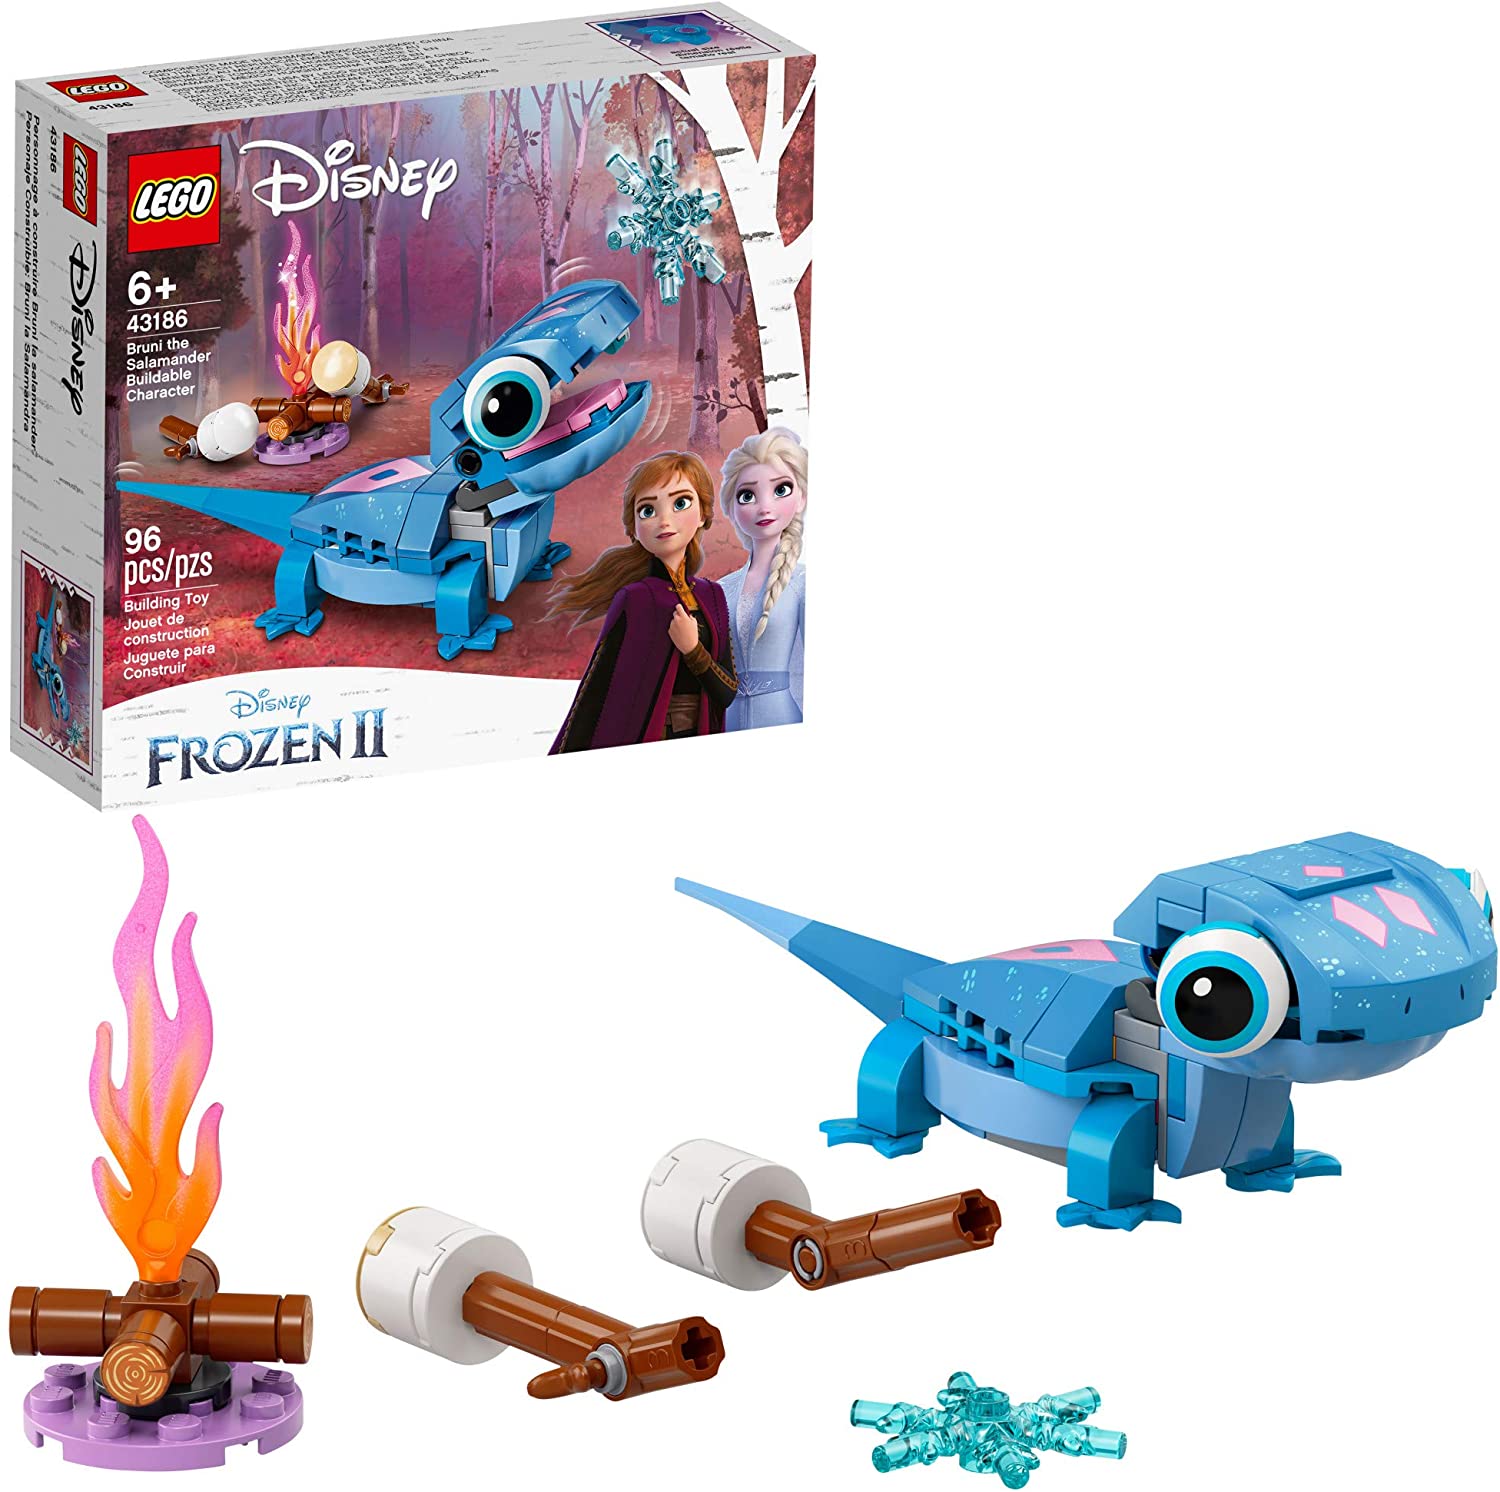 96 Pc. LEGO Disney Bruni The Salamander Buildable Character (43186) $10.39 - Free Ship w/Prime